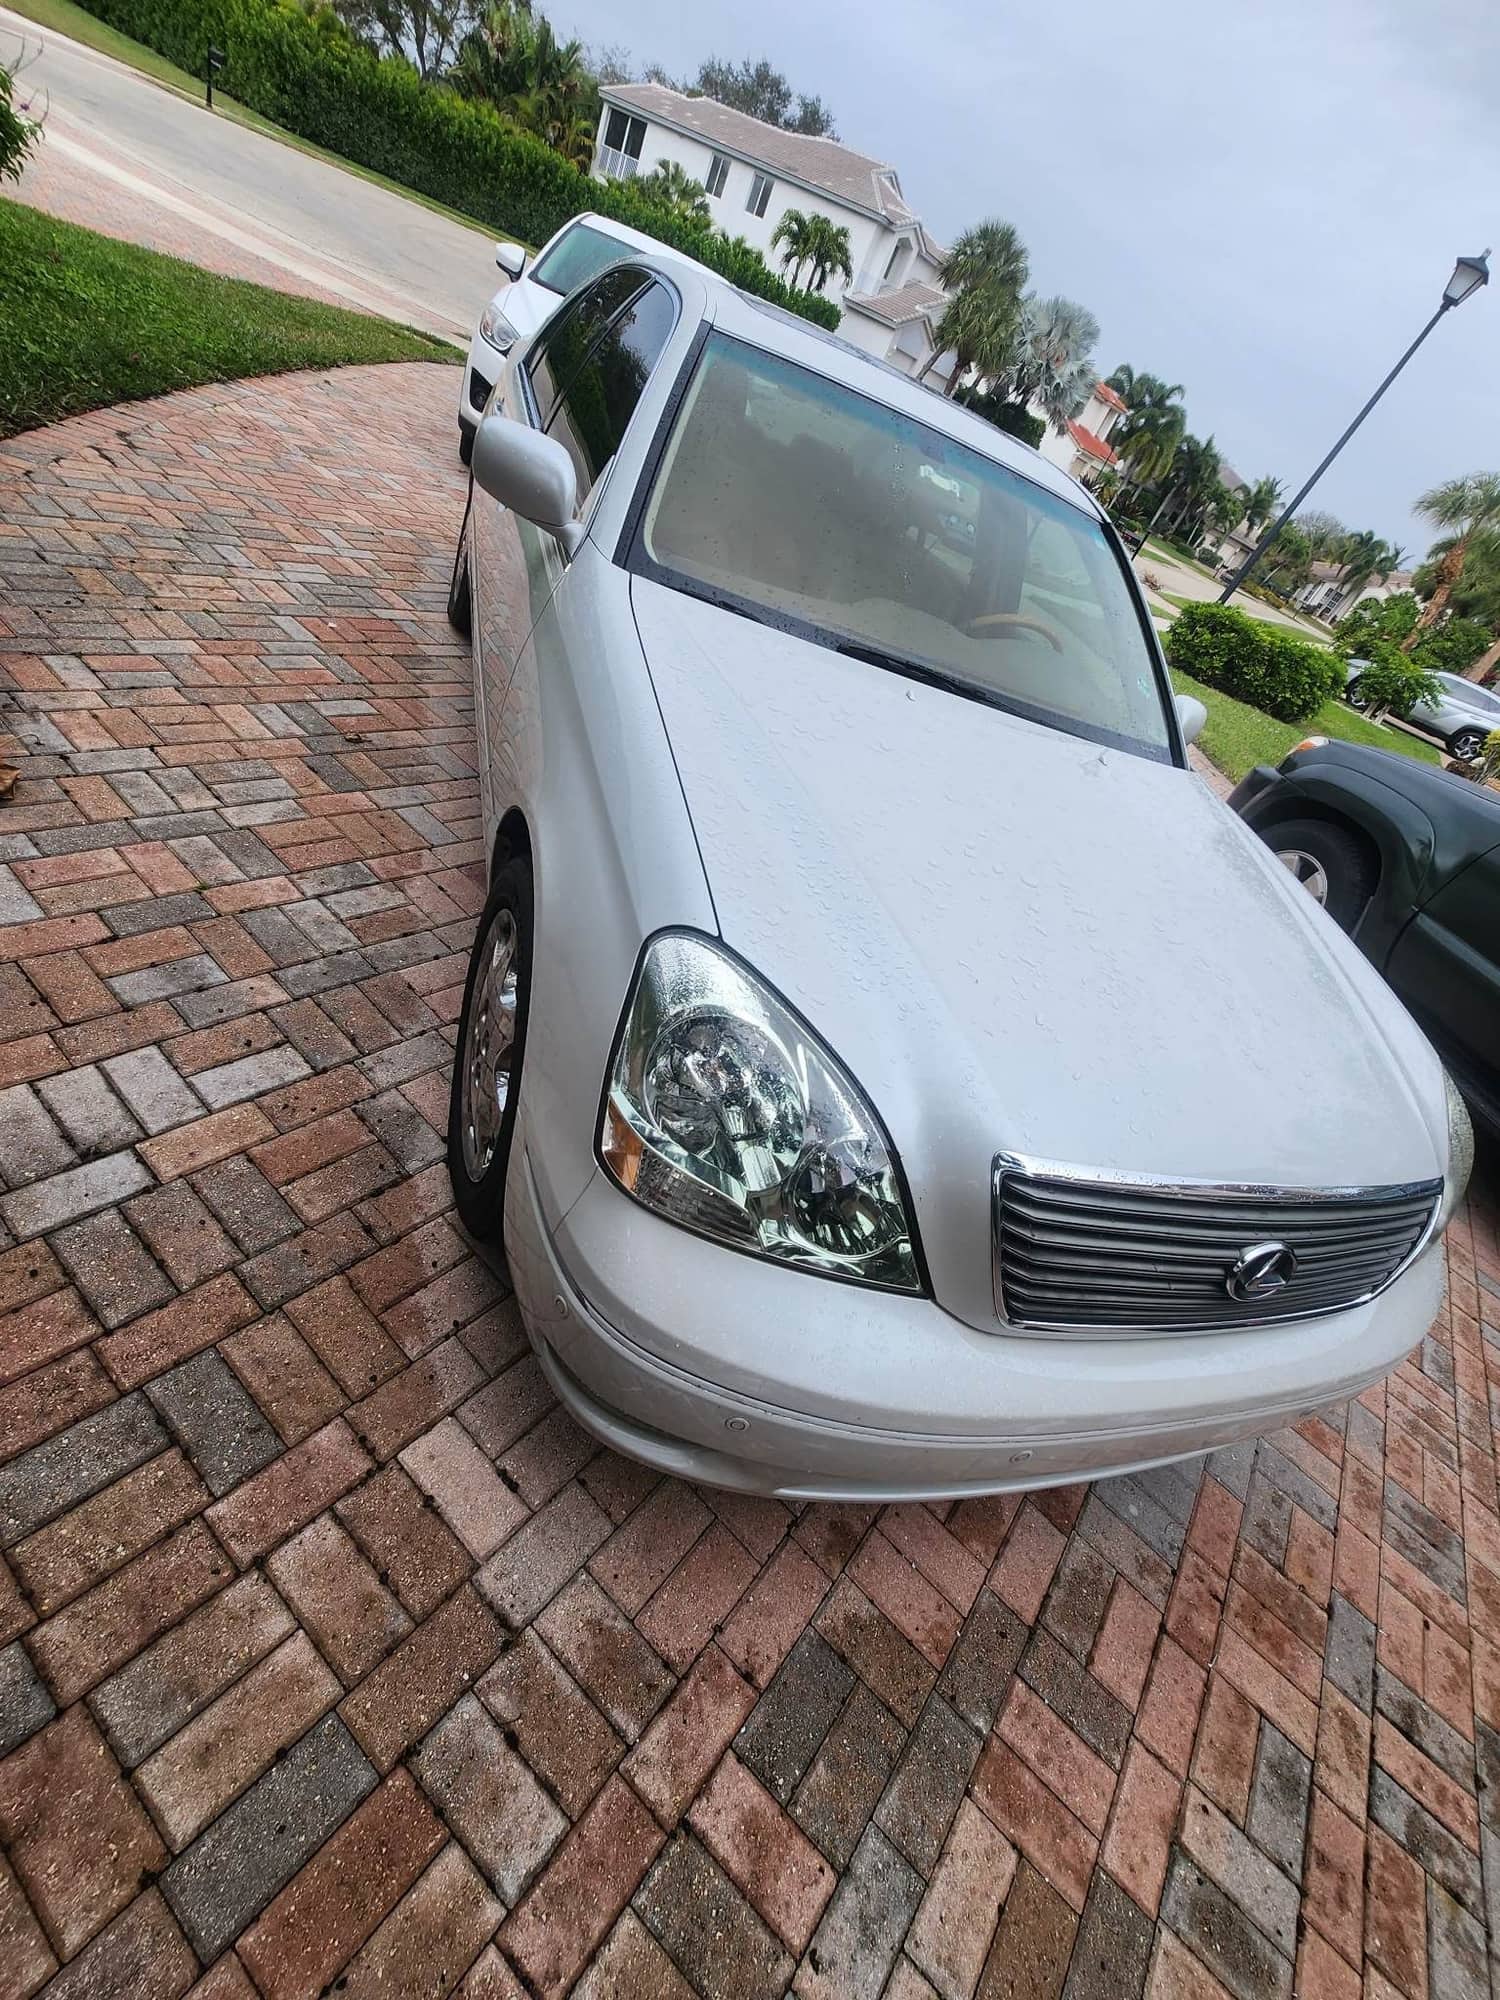 2003 Lexus LS430 - 2003 ls430 turnkey; no accidents/very well maintained - Used - VIN JTHBN30F030116799 - 146,200 Miles - 8 cyl - 2WD - Automatic - Sedan - White - Margate, FL 33063, United States